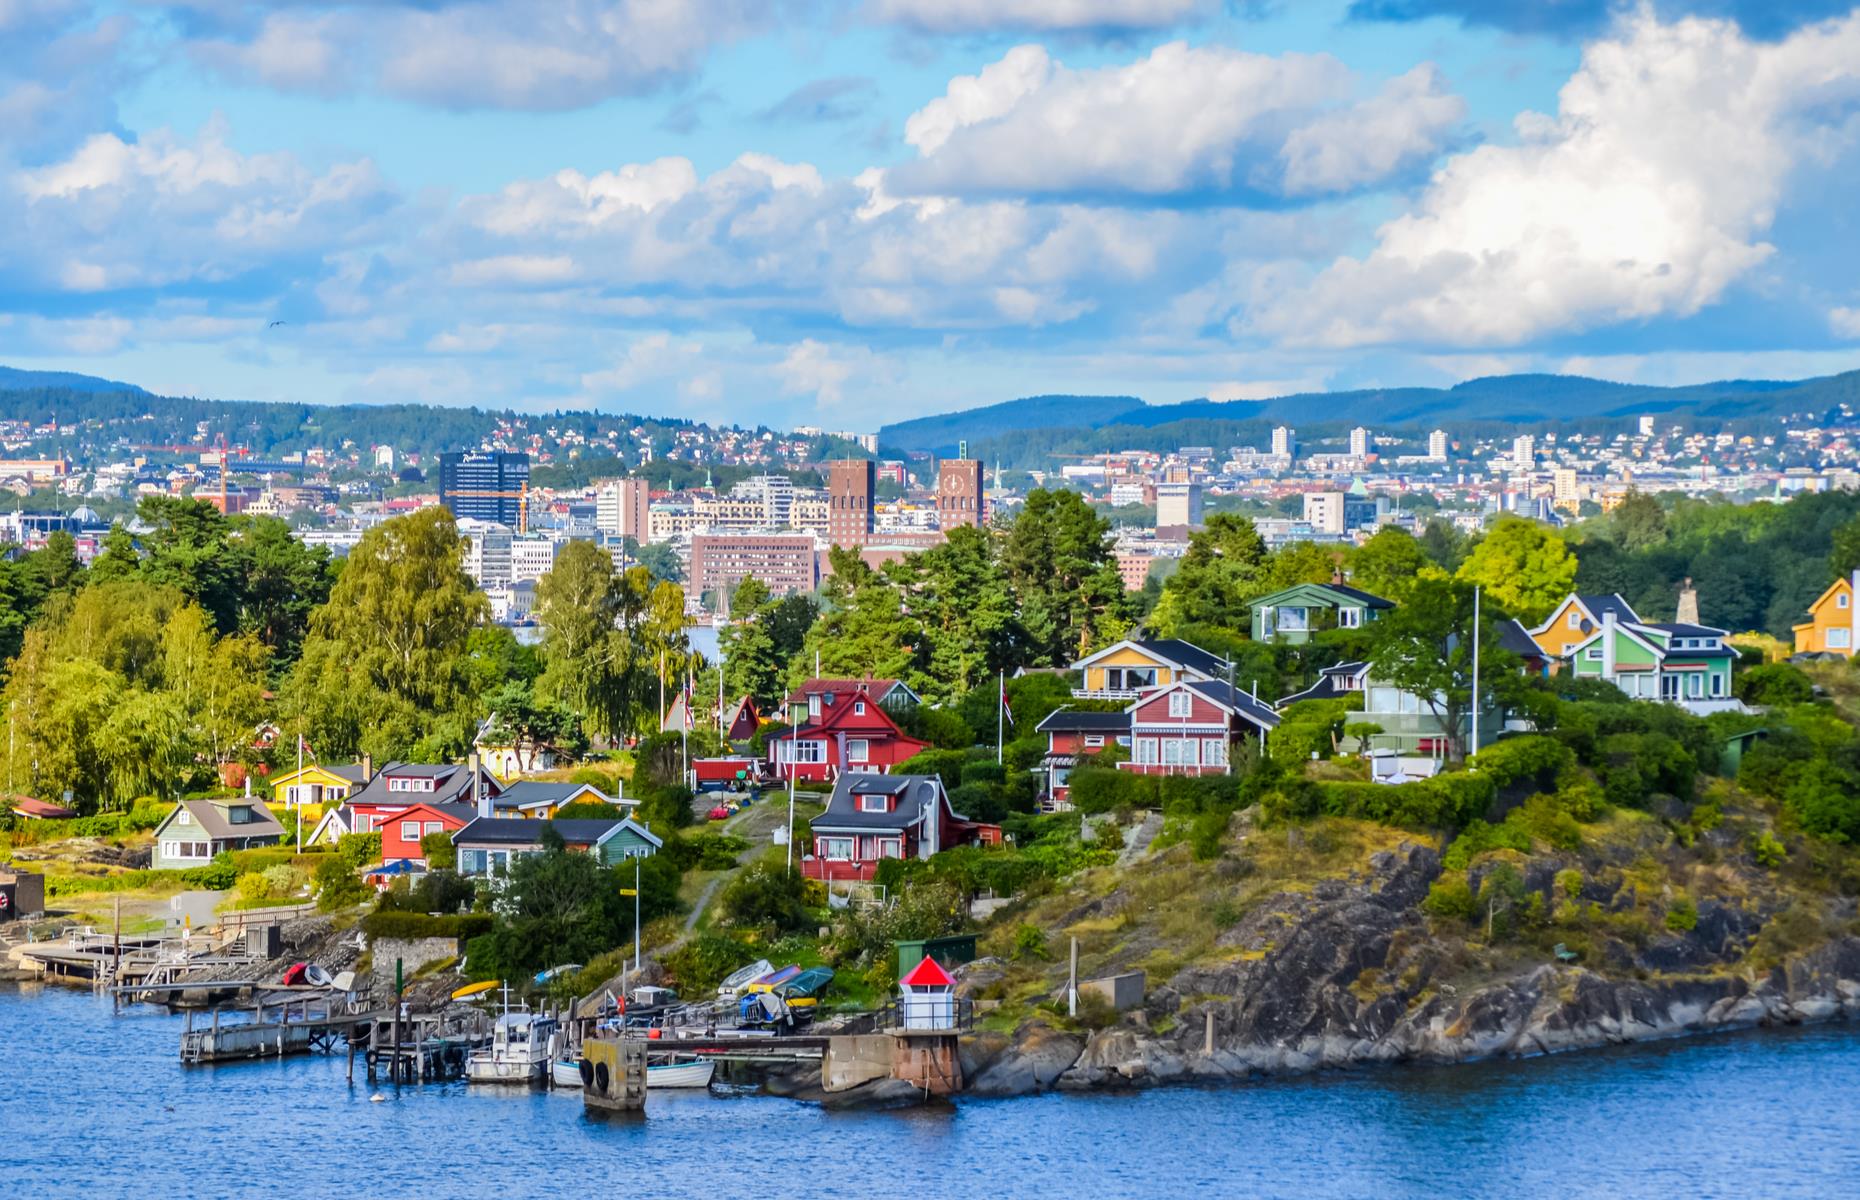 5th most expensive: Oslo, Norway